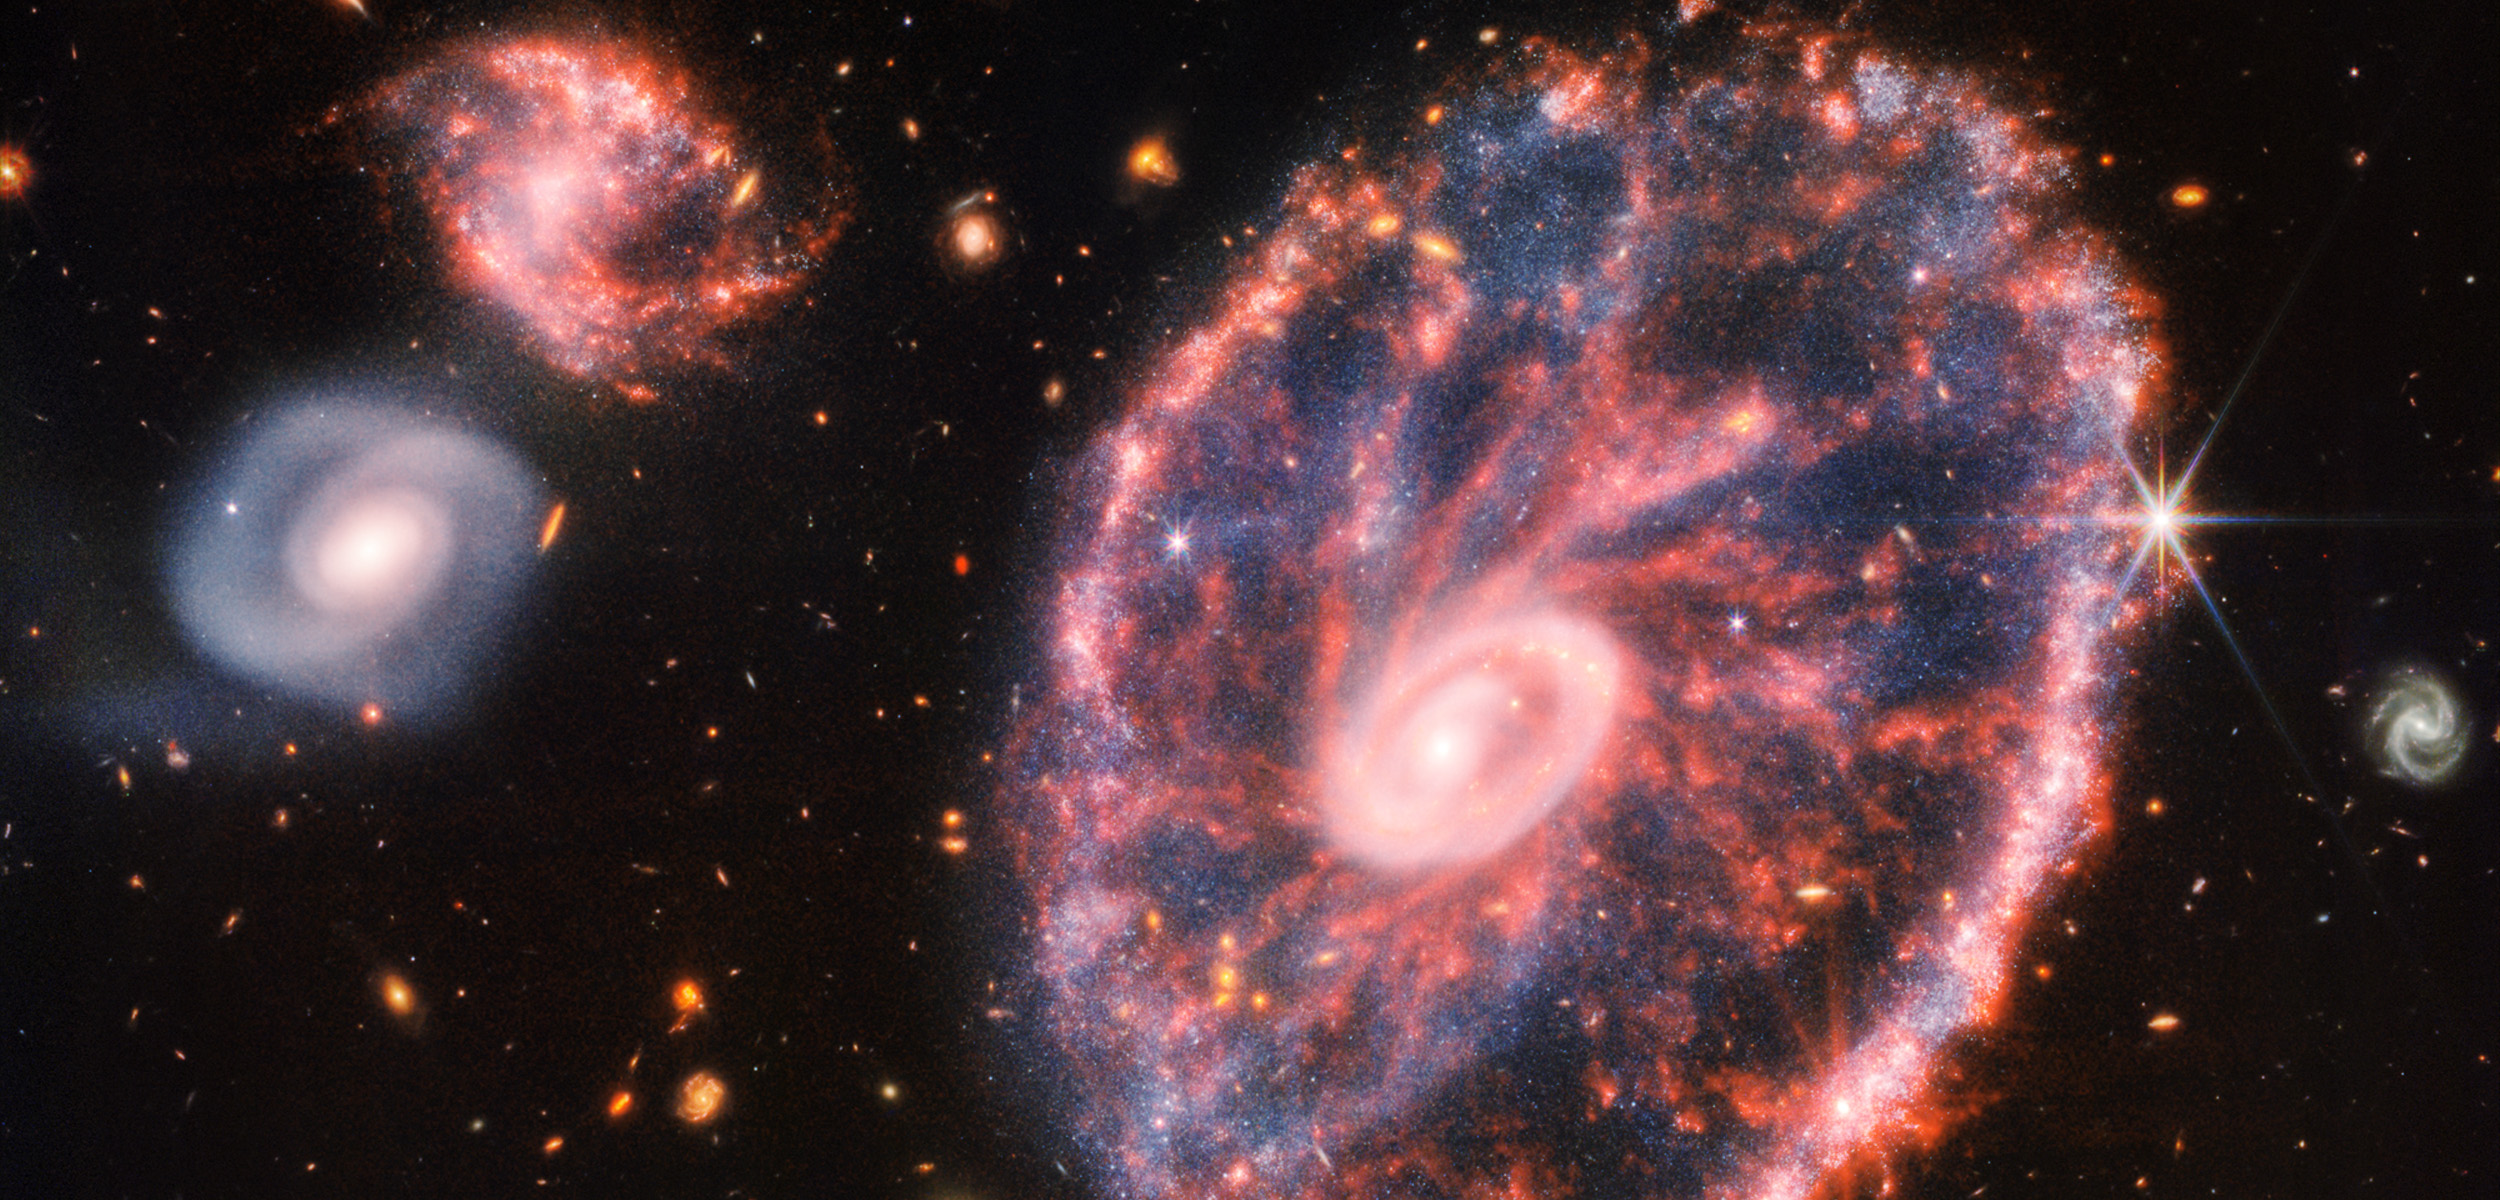 Cropped image of the Cartwheel Galaxy as seen by the James Webb Space Telescope. Credits: NASA, ESA, CSA, STScI.